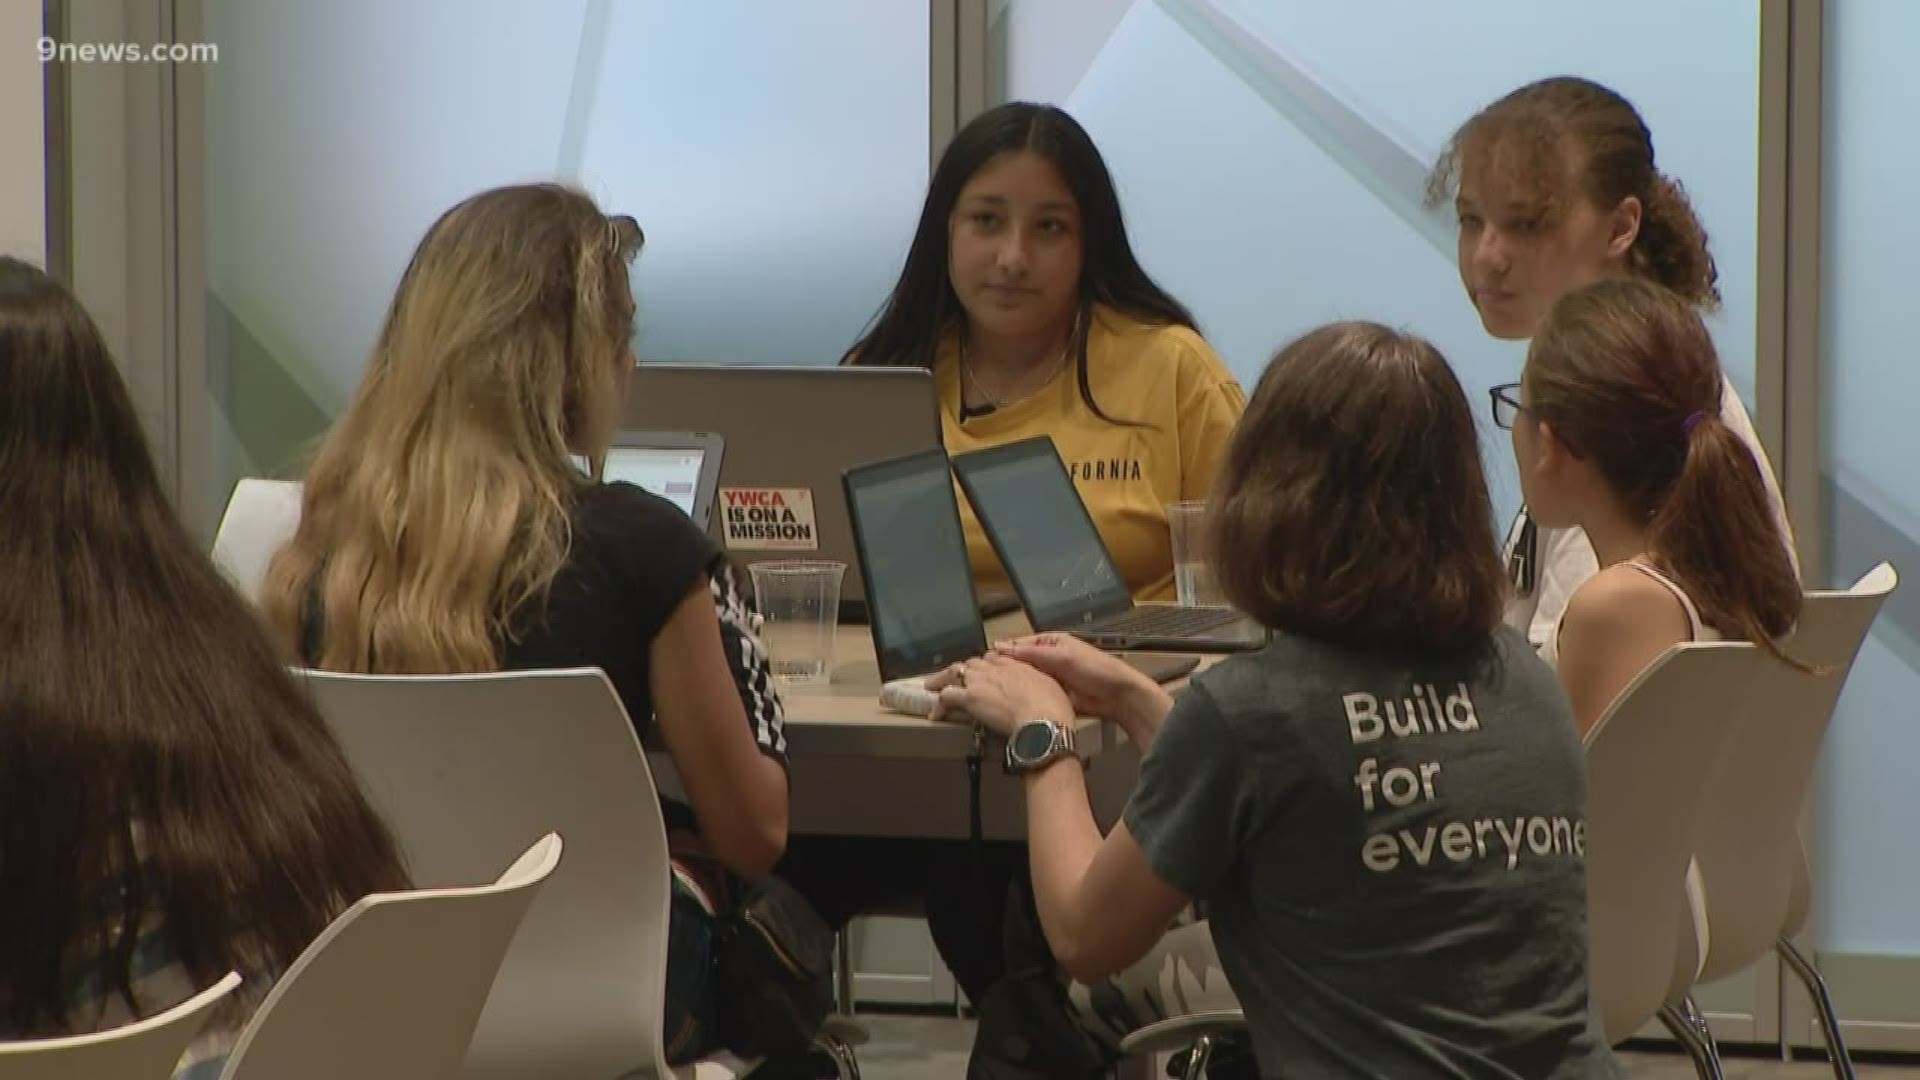 Google is fronting the cash, along with the YWCA in Boulder, in an effort to kickstart a STEM program that will eventually spread nationwide.